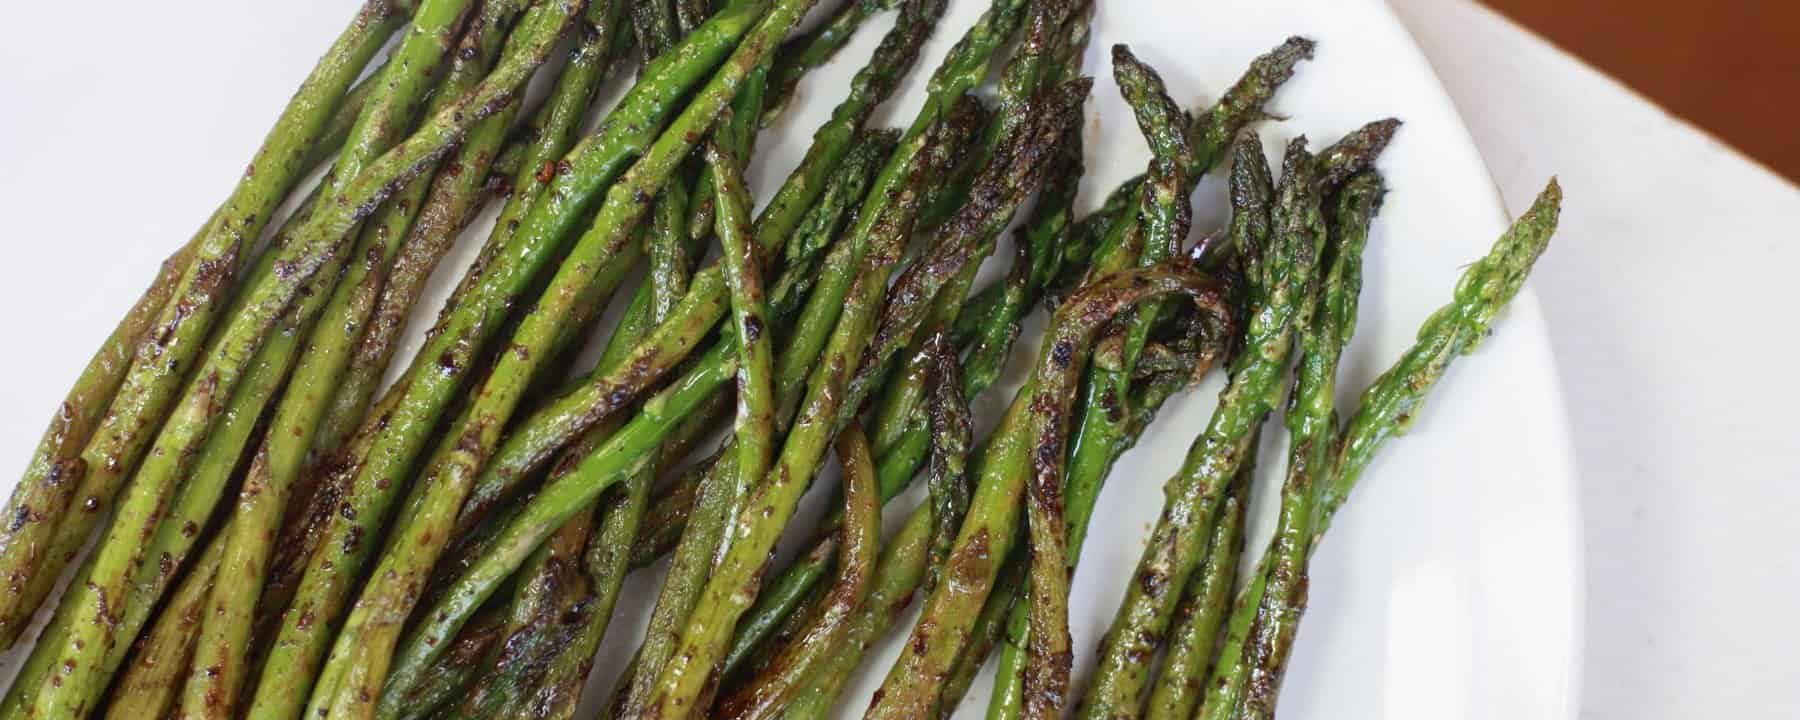 CARE Recipe: Mexican Lime and Chile Glazed Asparagus (Prebiotic-Rich Tender Side)